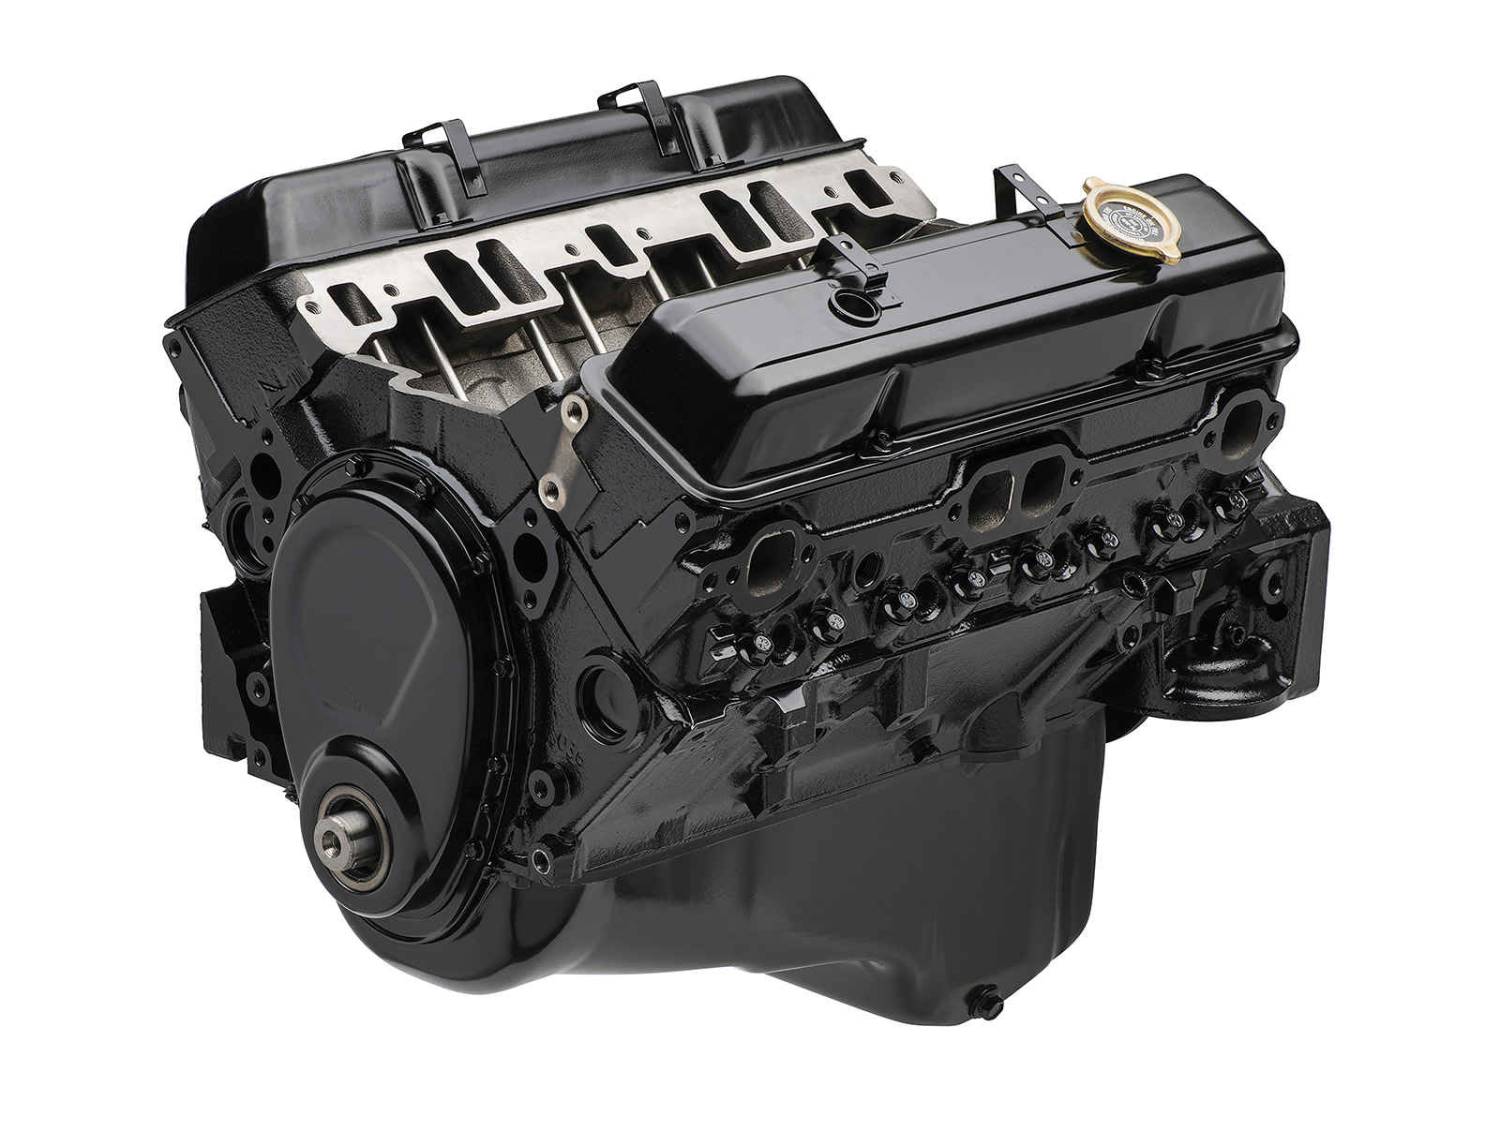 Chevy 5.3 High Performance Crate Engine